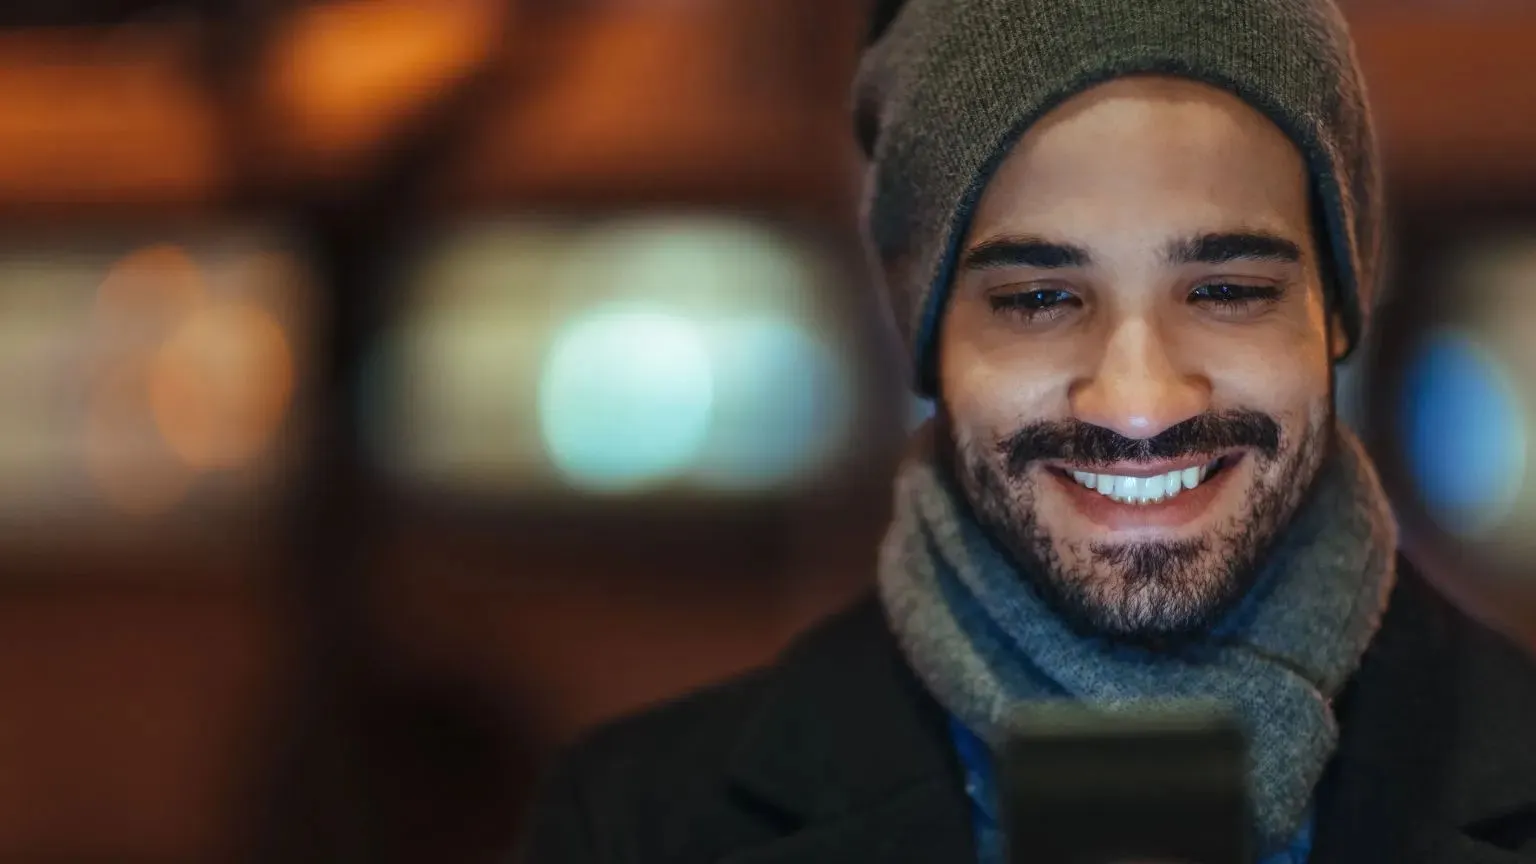 Man smiling with phone